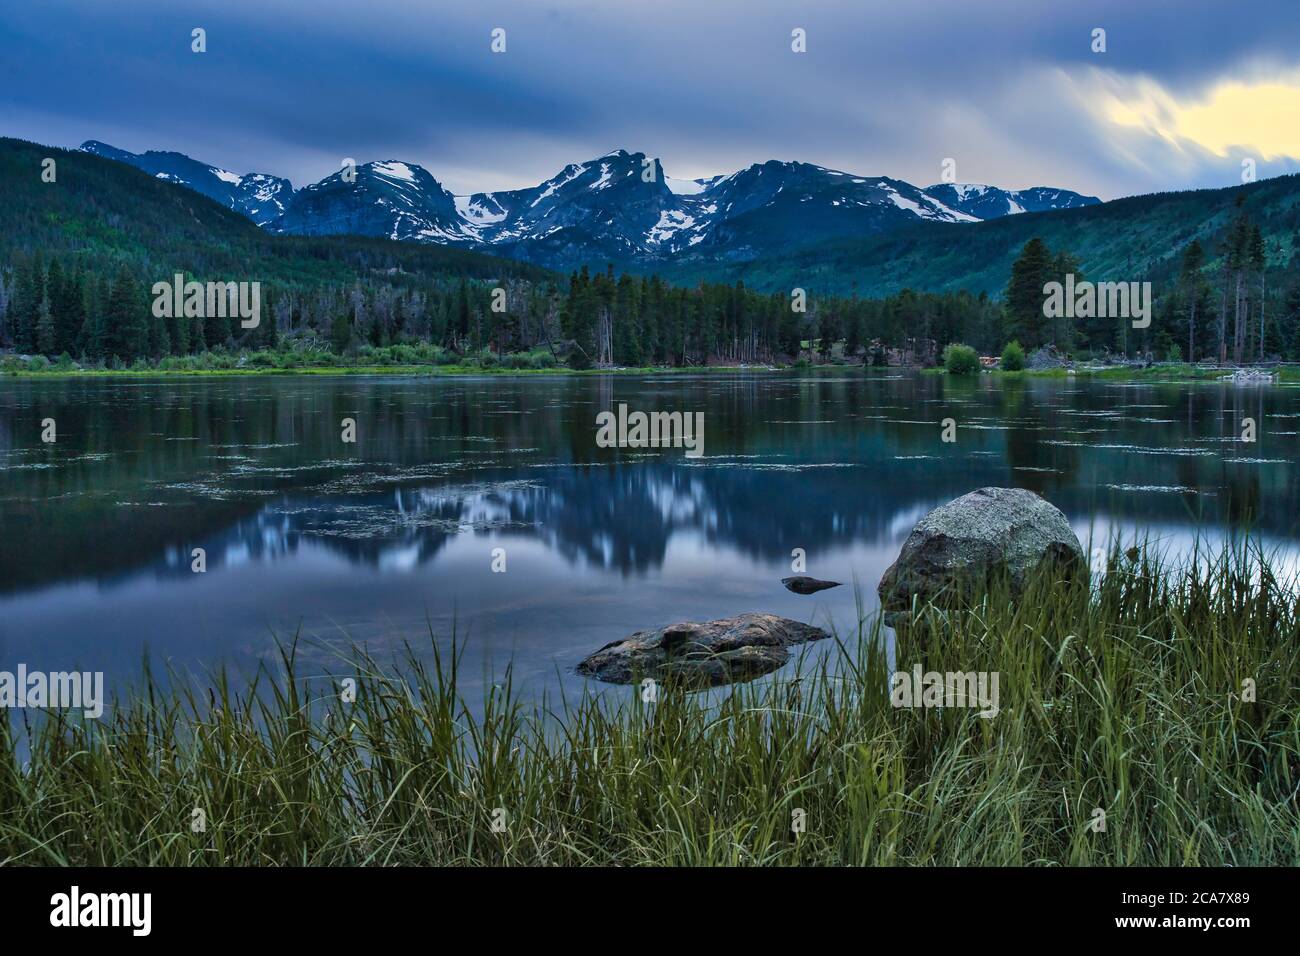 Sunset on Sprague lake in the rocky mountains of colorado. People fly fishing under the shadow of the beautiful mountain range Stock Photo